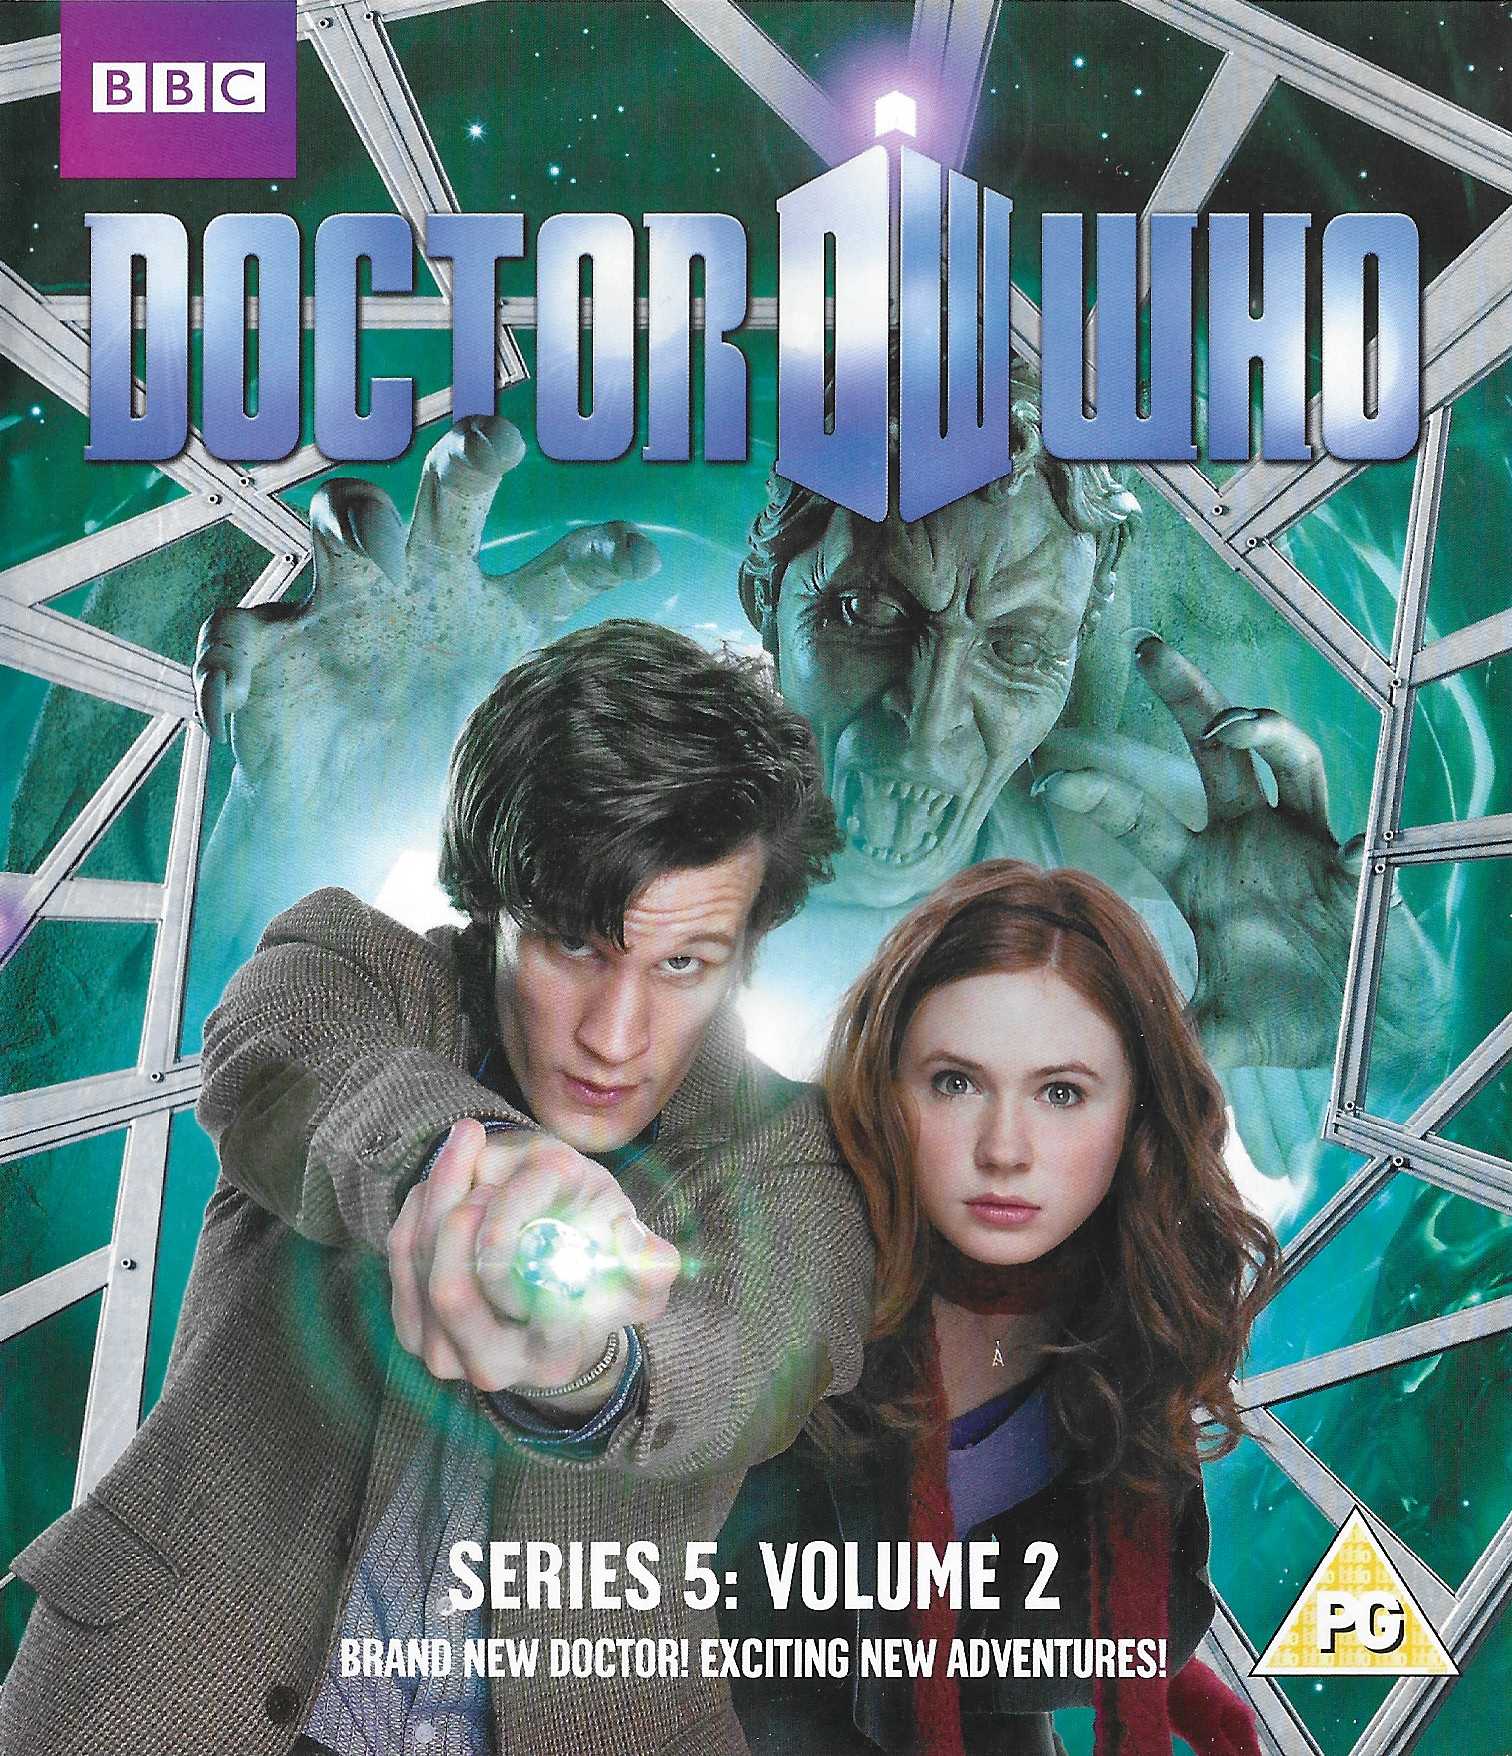 Picture of Doctor Who - Series 5, volume 2 by artist Steven Moffat / Toby Whithouse from the BBC blu-rays - Records and Tapes library